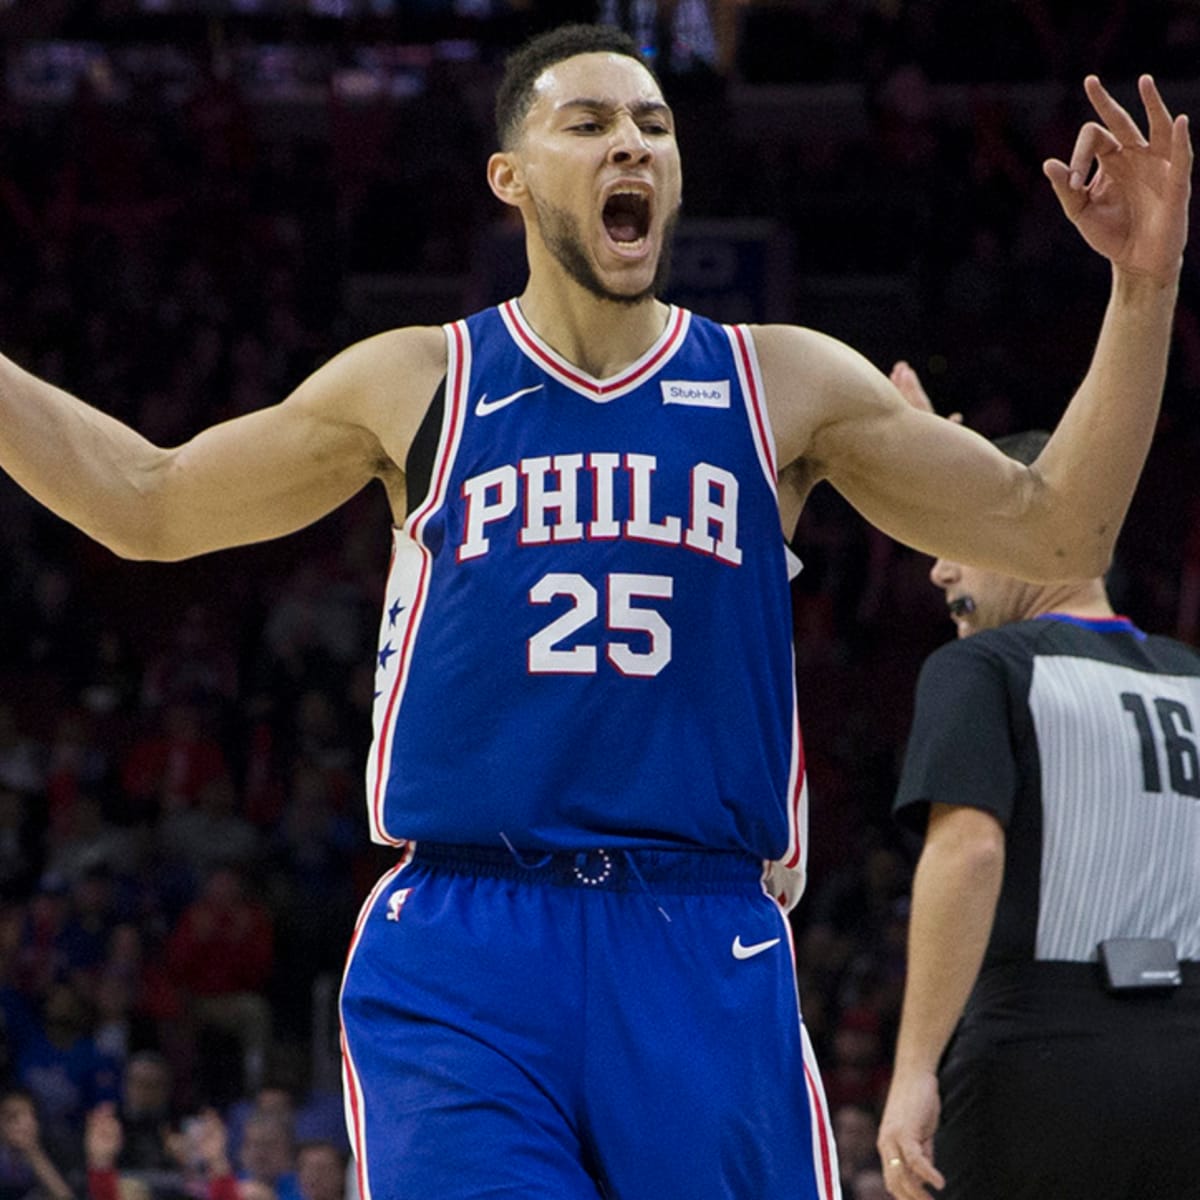 Beyond the Patch: The Philadelphia 76ers and StubHub - Front